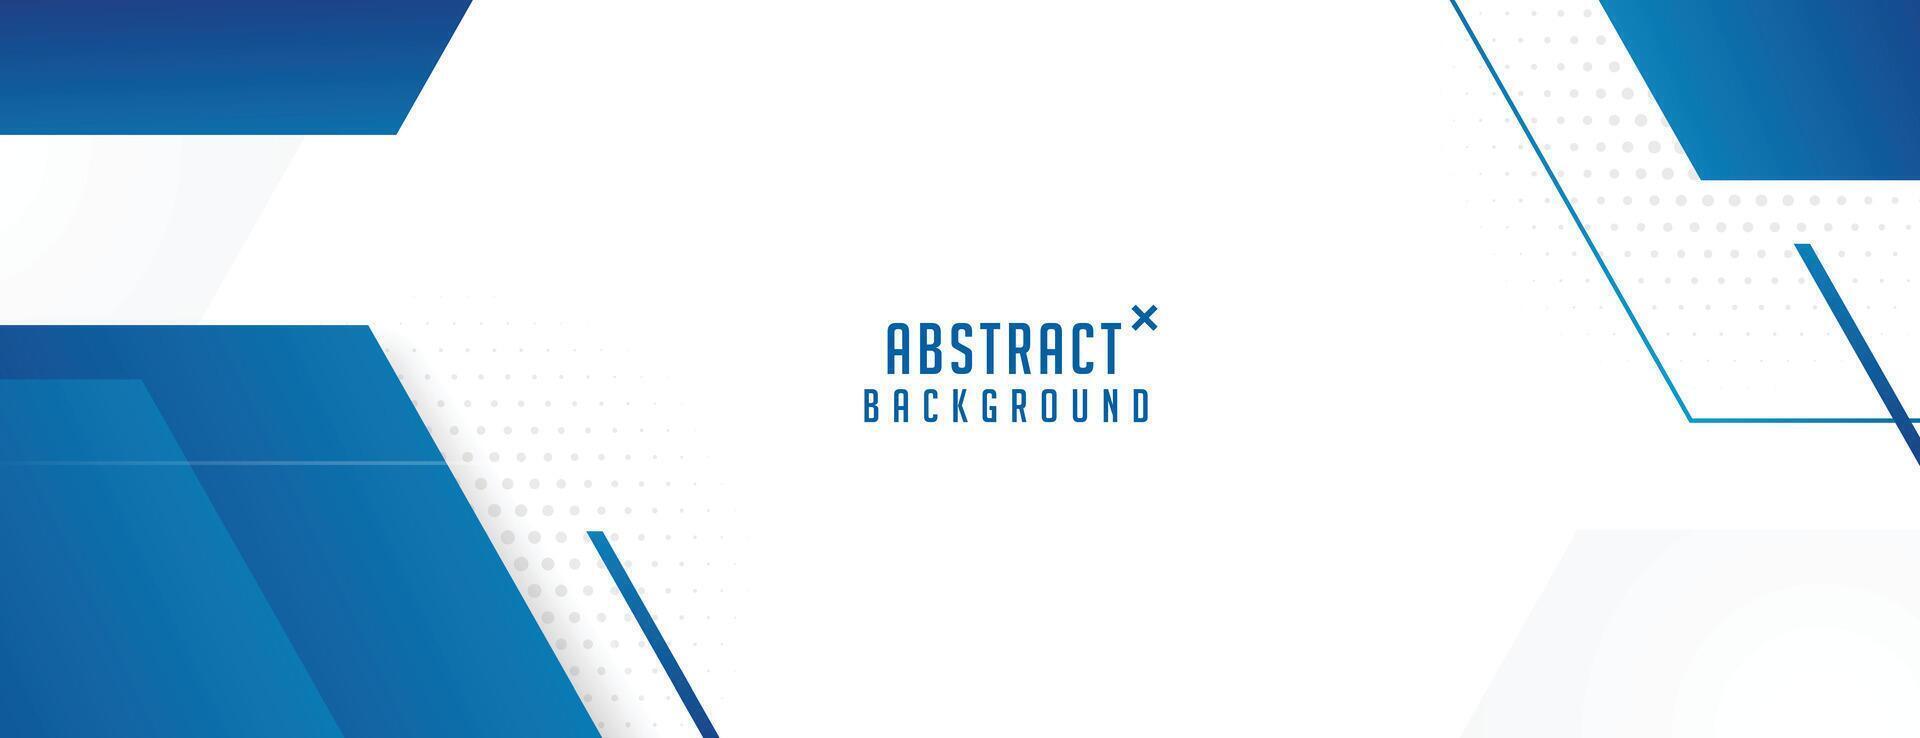 white abstract background with blue geometric pattern design vector